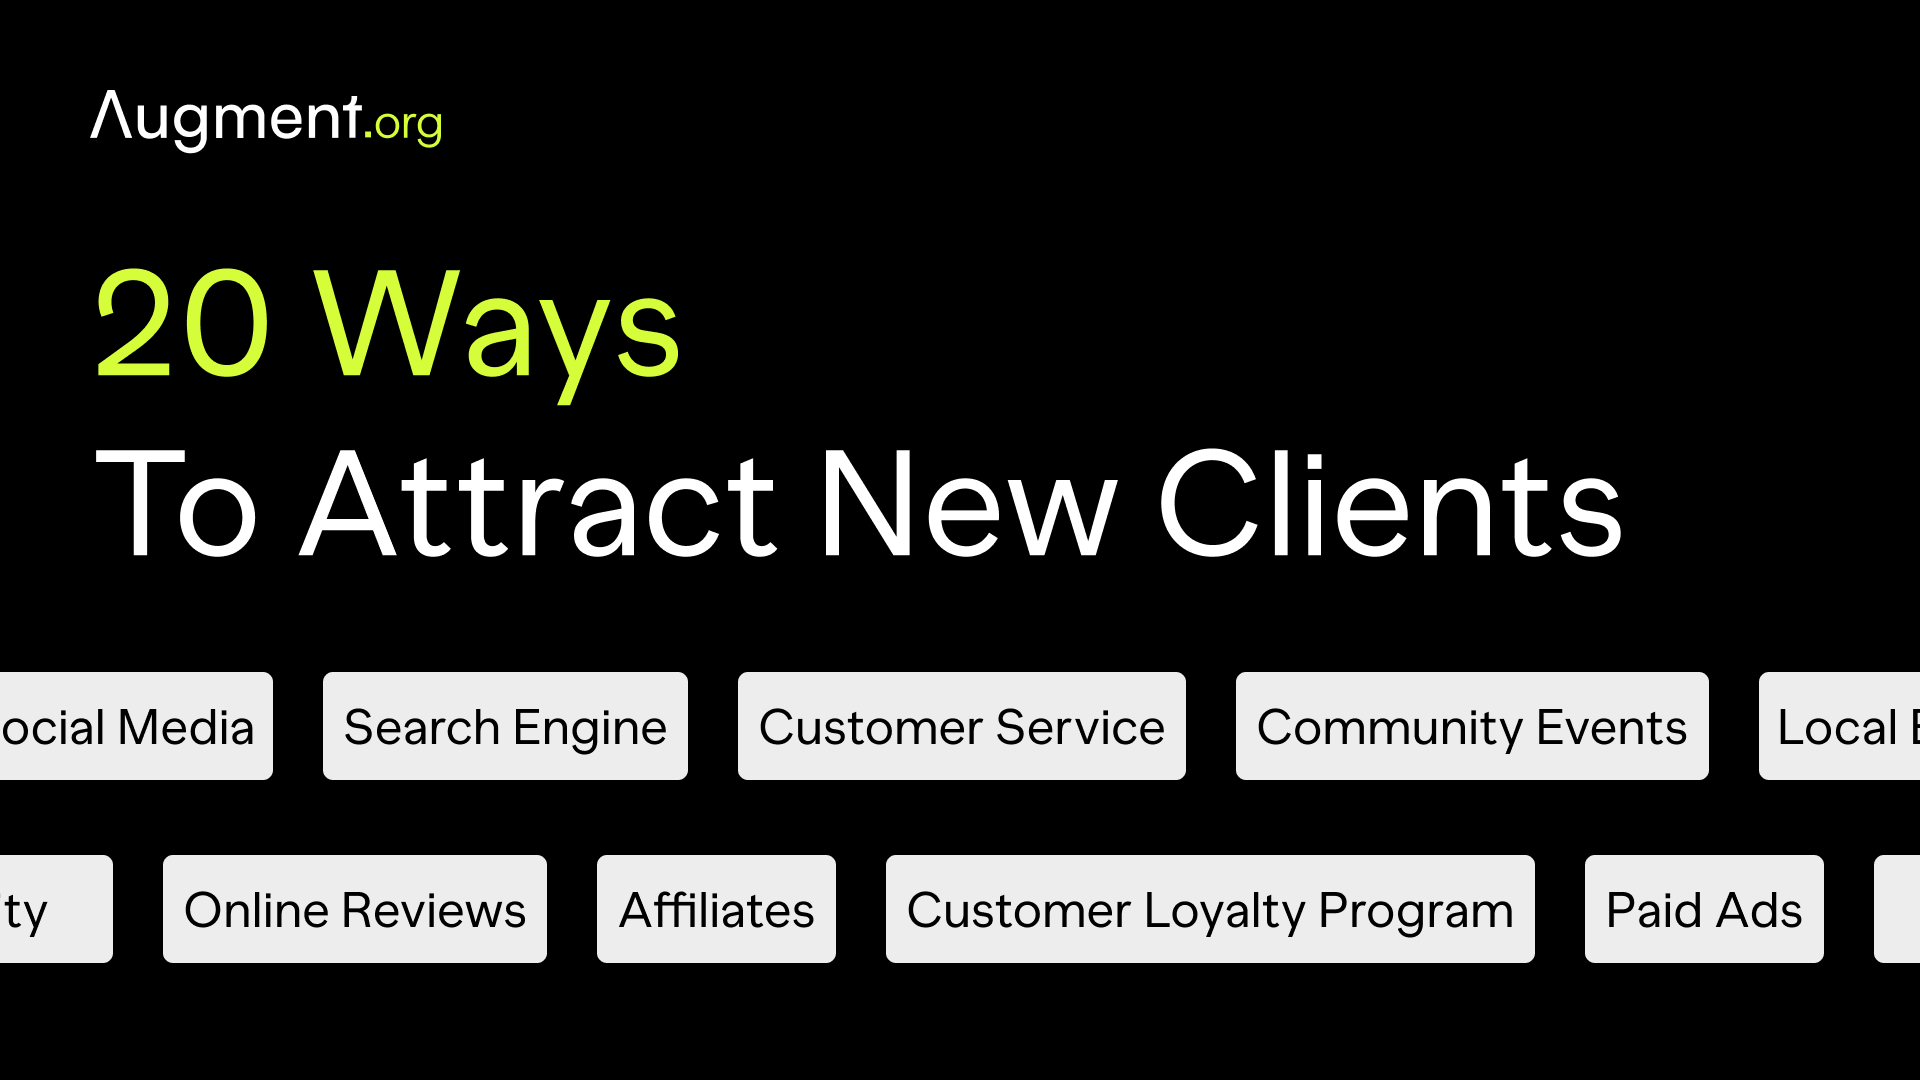 How to Attract Customers: 20 Ways to Attract New Clients